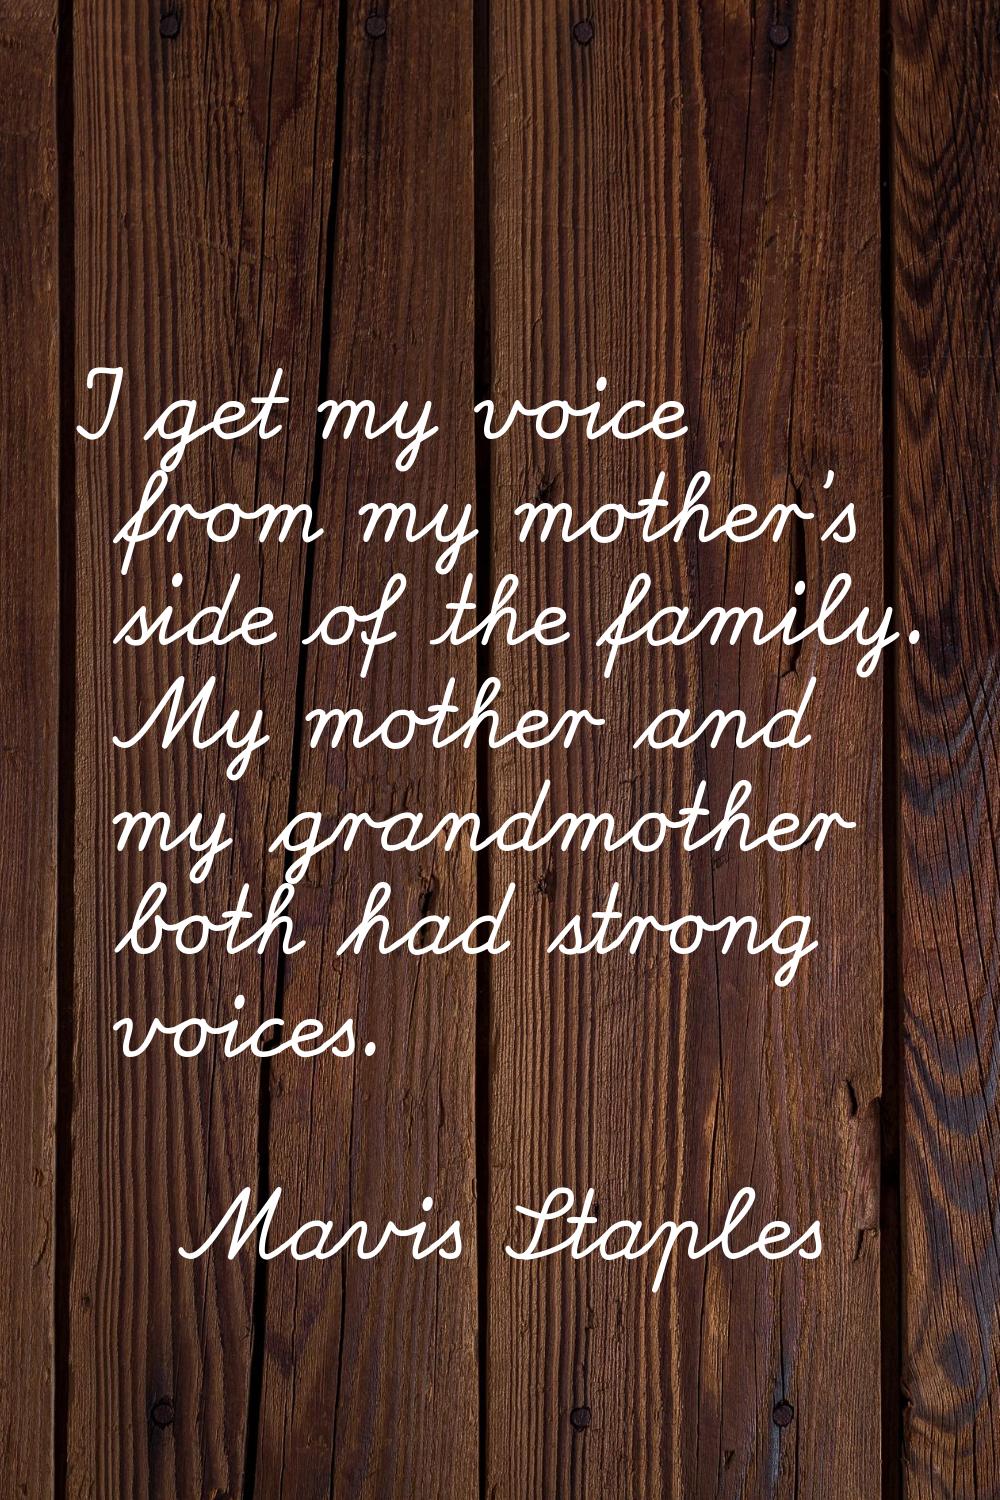 I get my voice from my mother's side of the family. My mother and my grandmother both had strong vo